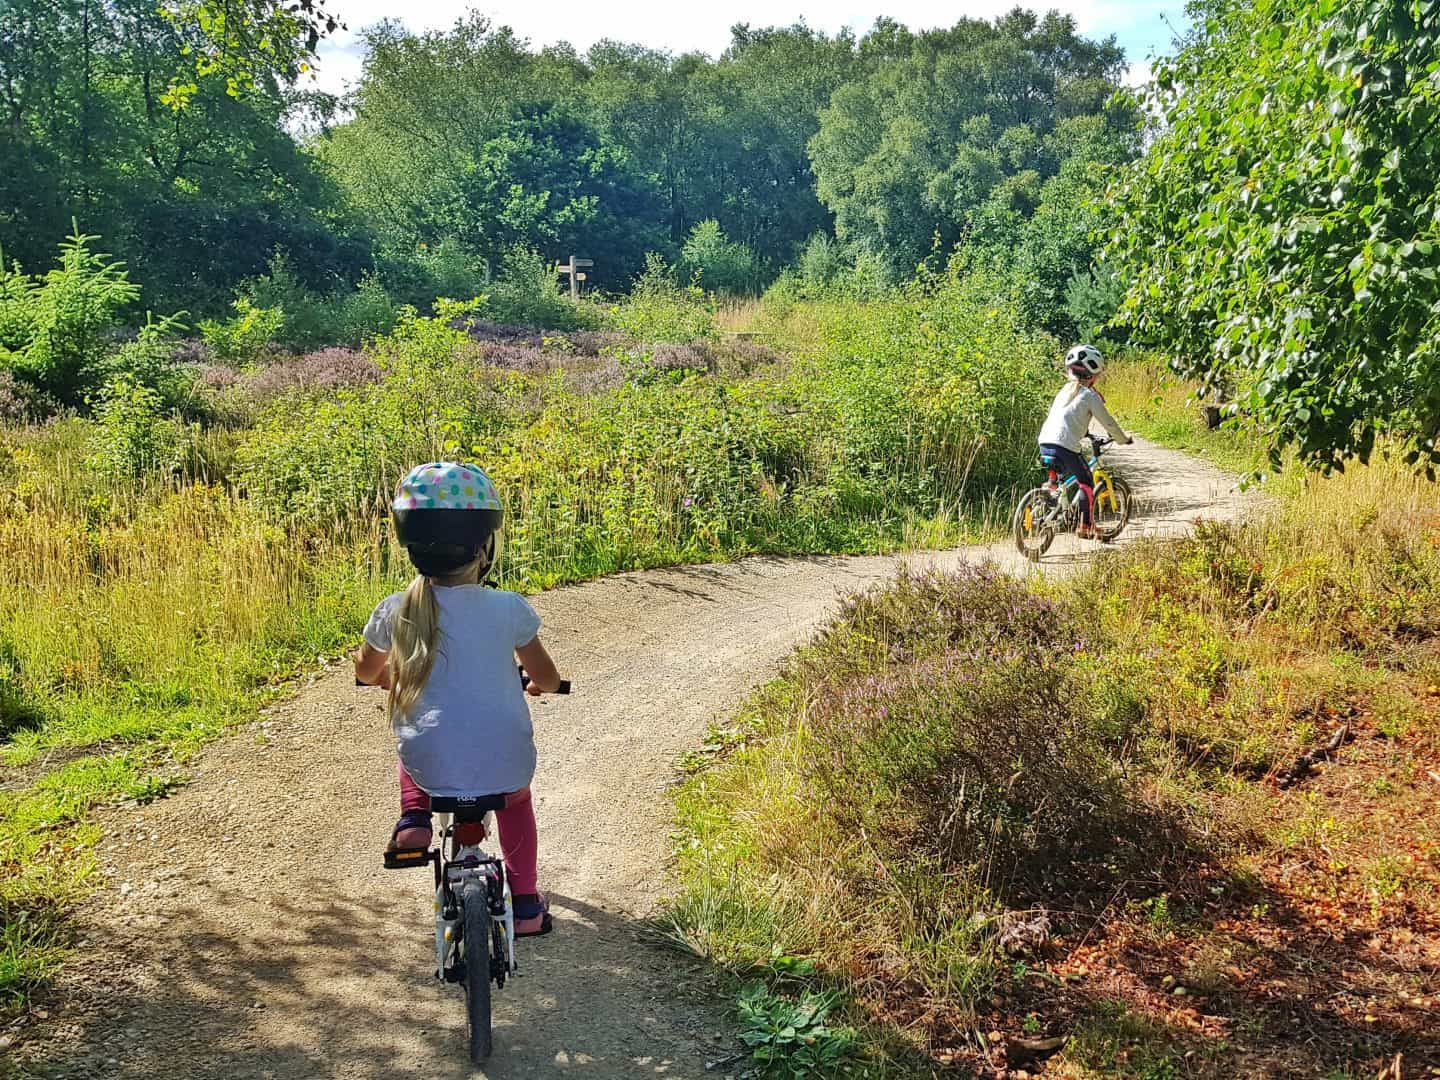 Two children on bicycles pedalling away from the camera on an off road trail